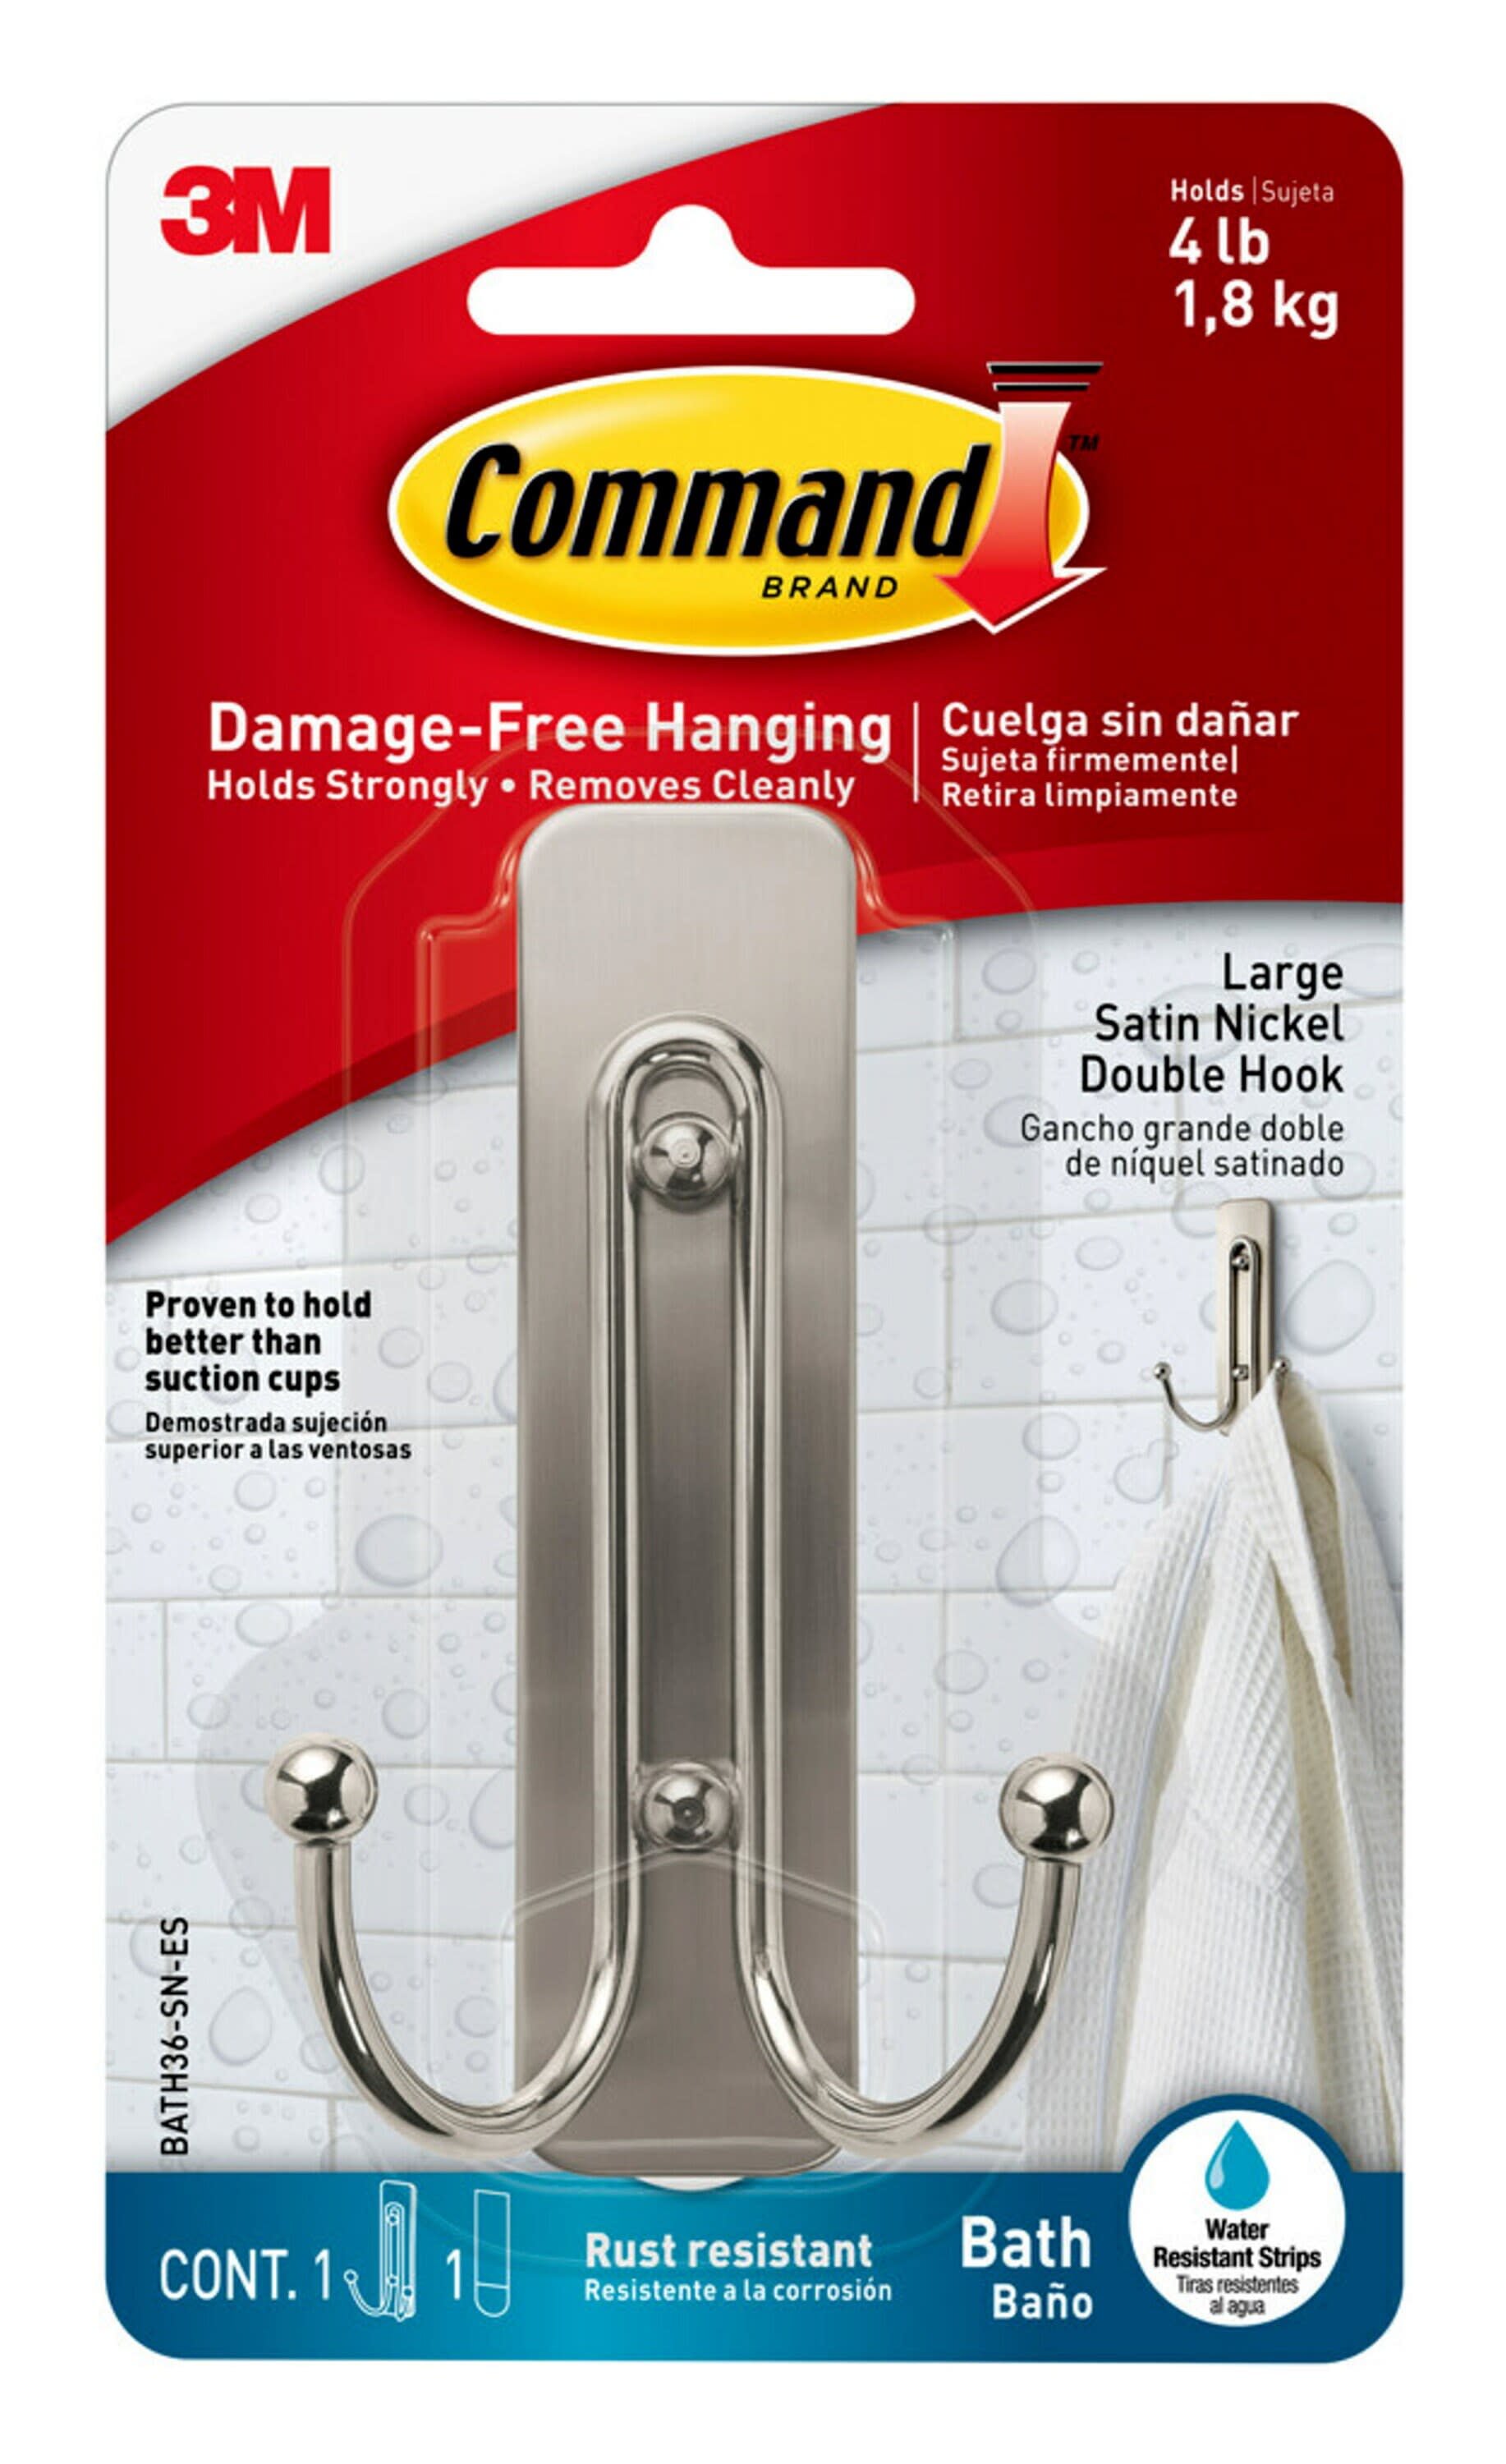 Metal Command Bathroom Large Double Hook Holds up to 1.8 kg & Command 17081 Damage Free Medium Hooks 2 Pack Damage Free Hanging White Pack of 1 Hook and 1 Adhesive Strip 